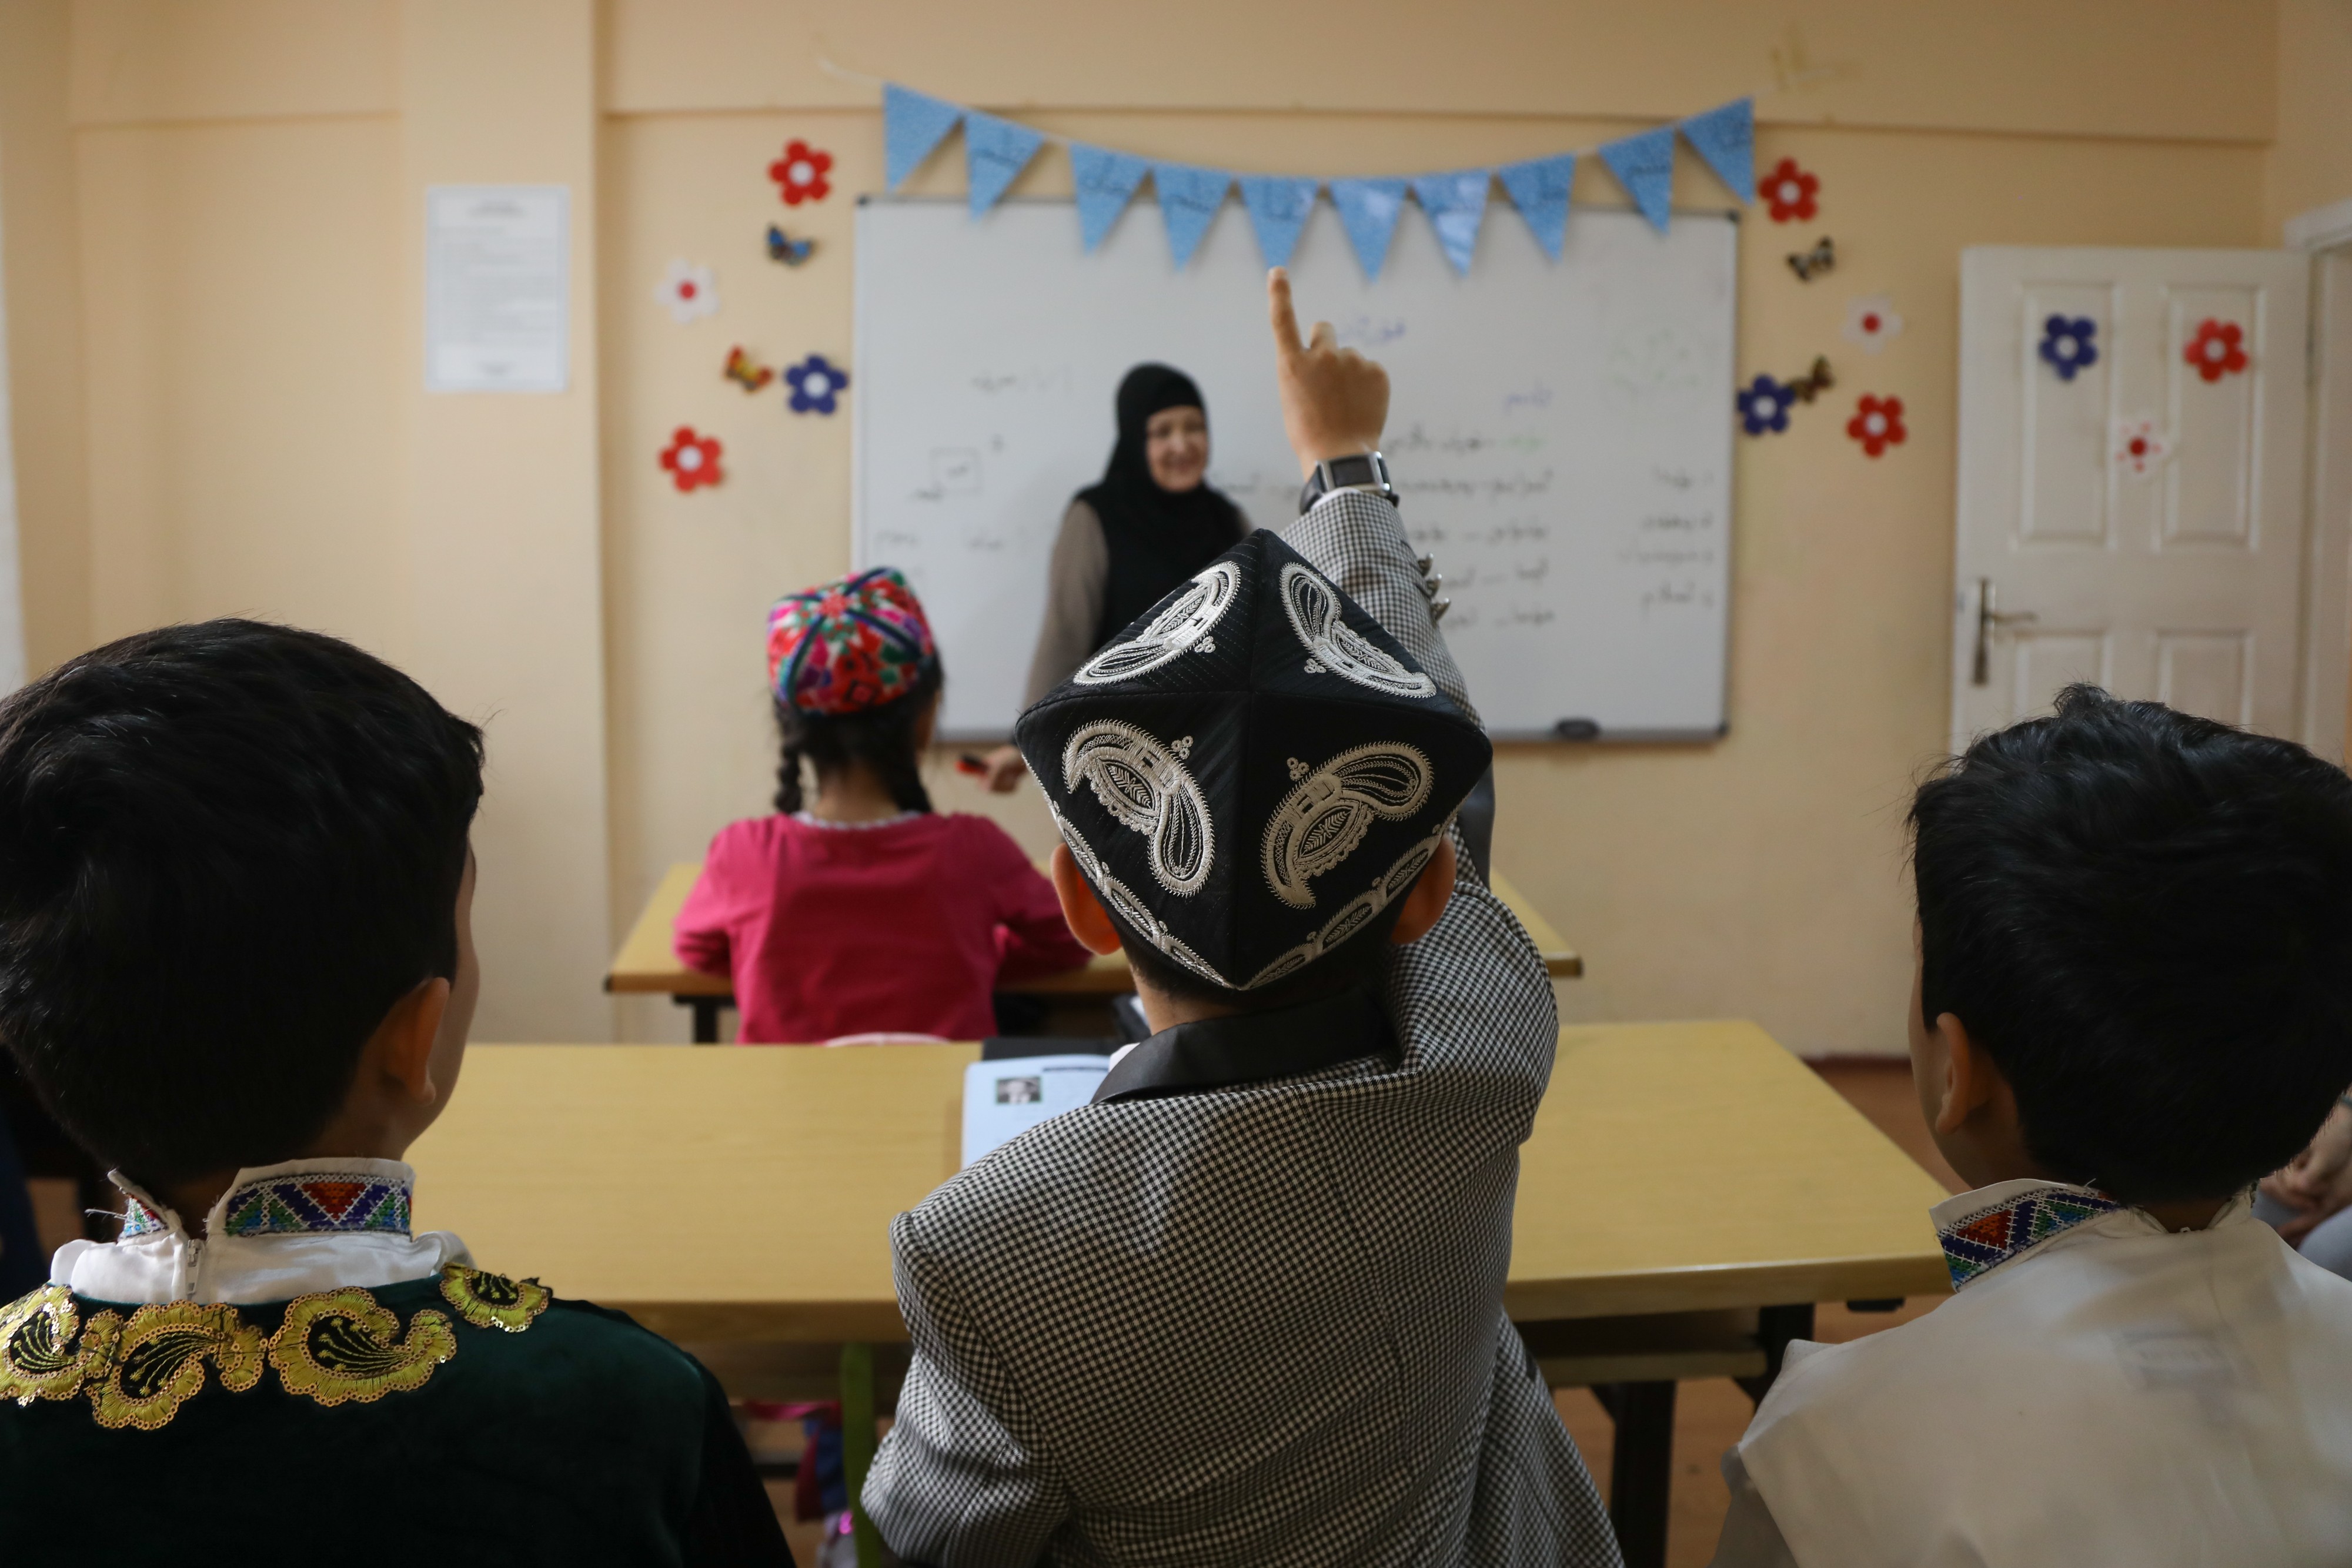 A student raises his hand in class at a Uygur school in Istanbul. Photo: Helene Franchineau